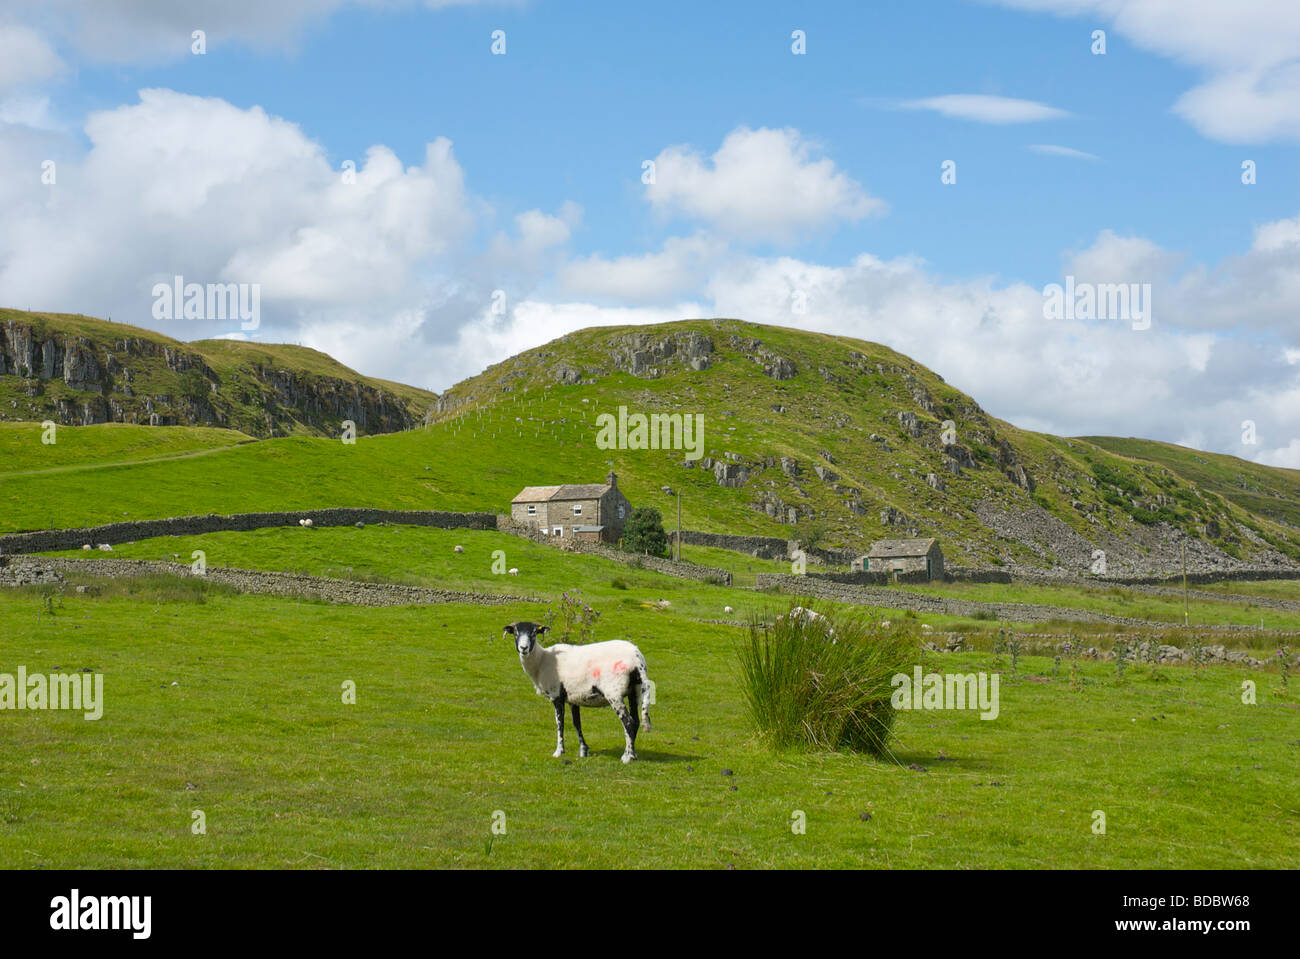 Upper Teesdale near Middleton-in-Teesdale, Northumberland National Park, England UK Stock Photo